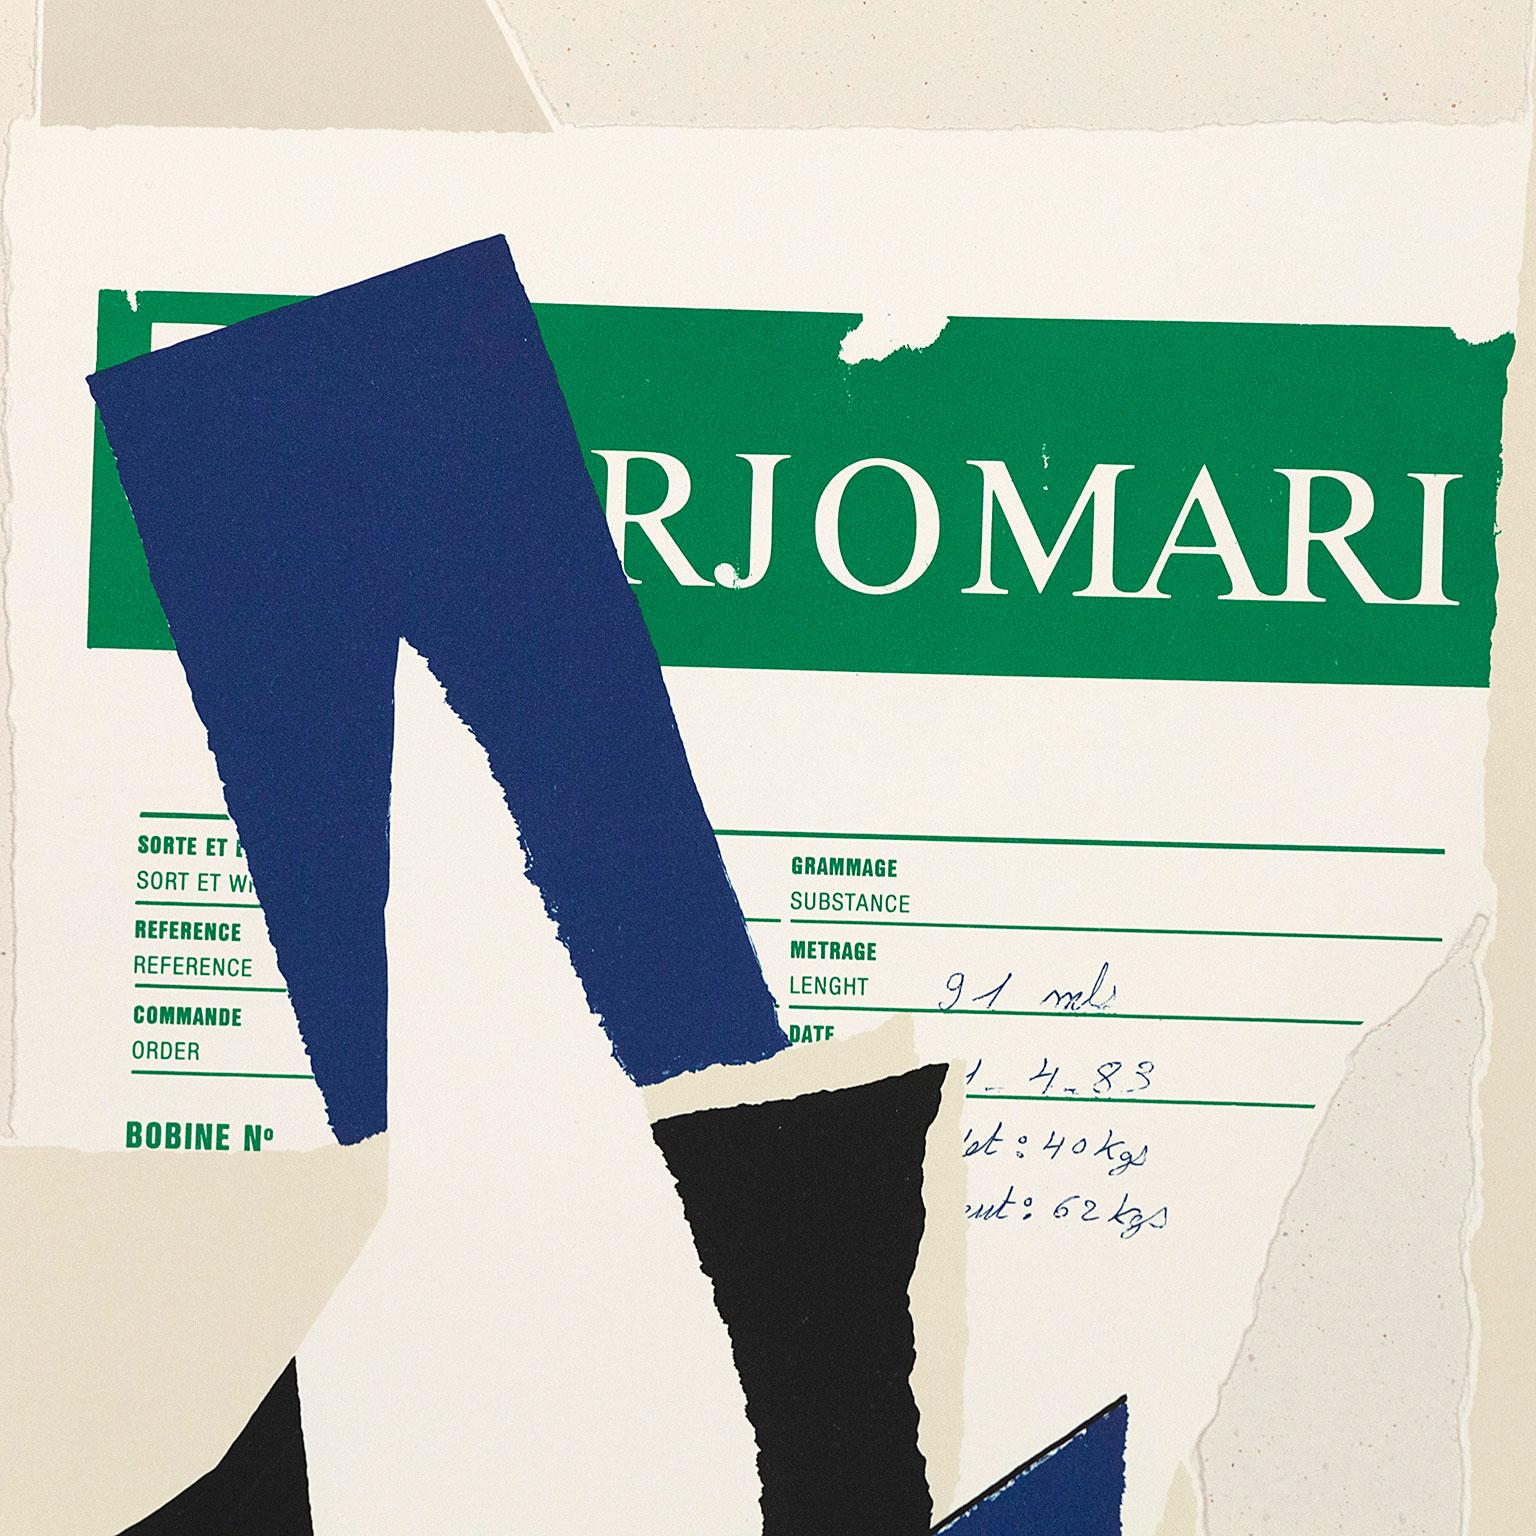 Robert Motherwell (1915-1991), alongside Jackson Pollock, Mark Rothko, and Willem de Kooning, made up the quartet of American abstract painters that radically defined Modern painting and established New York City as the center of the art world for